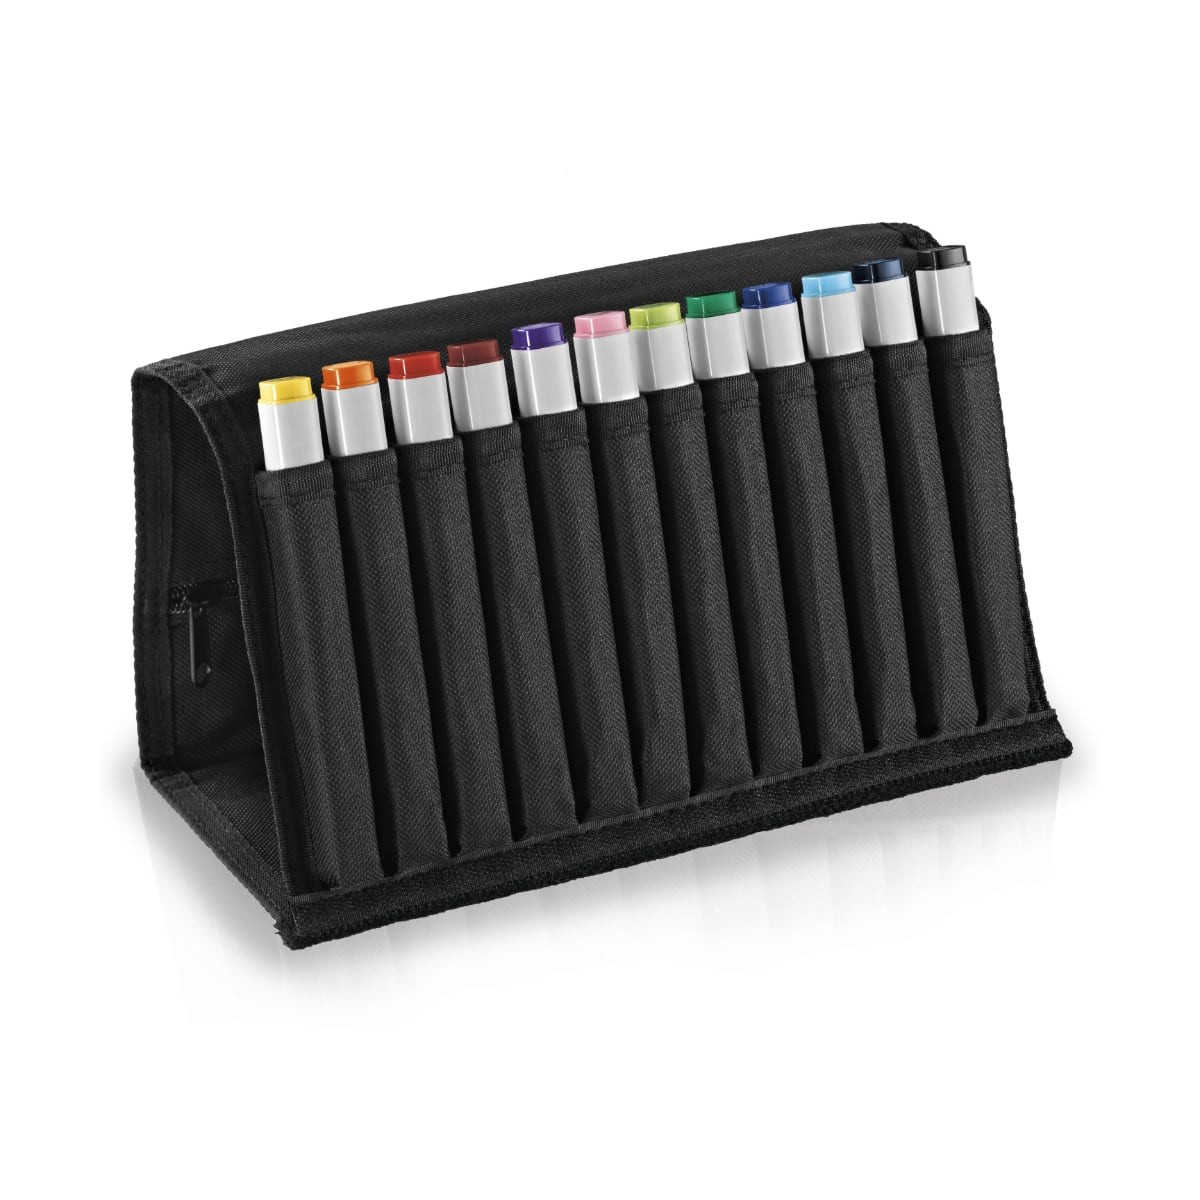 Copic Classic 12 colors set in a wallet